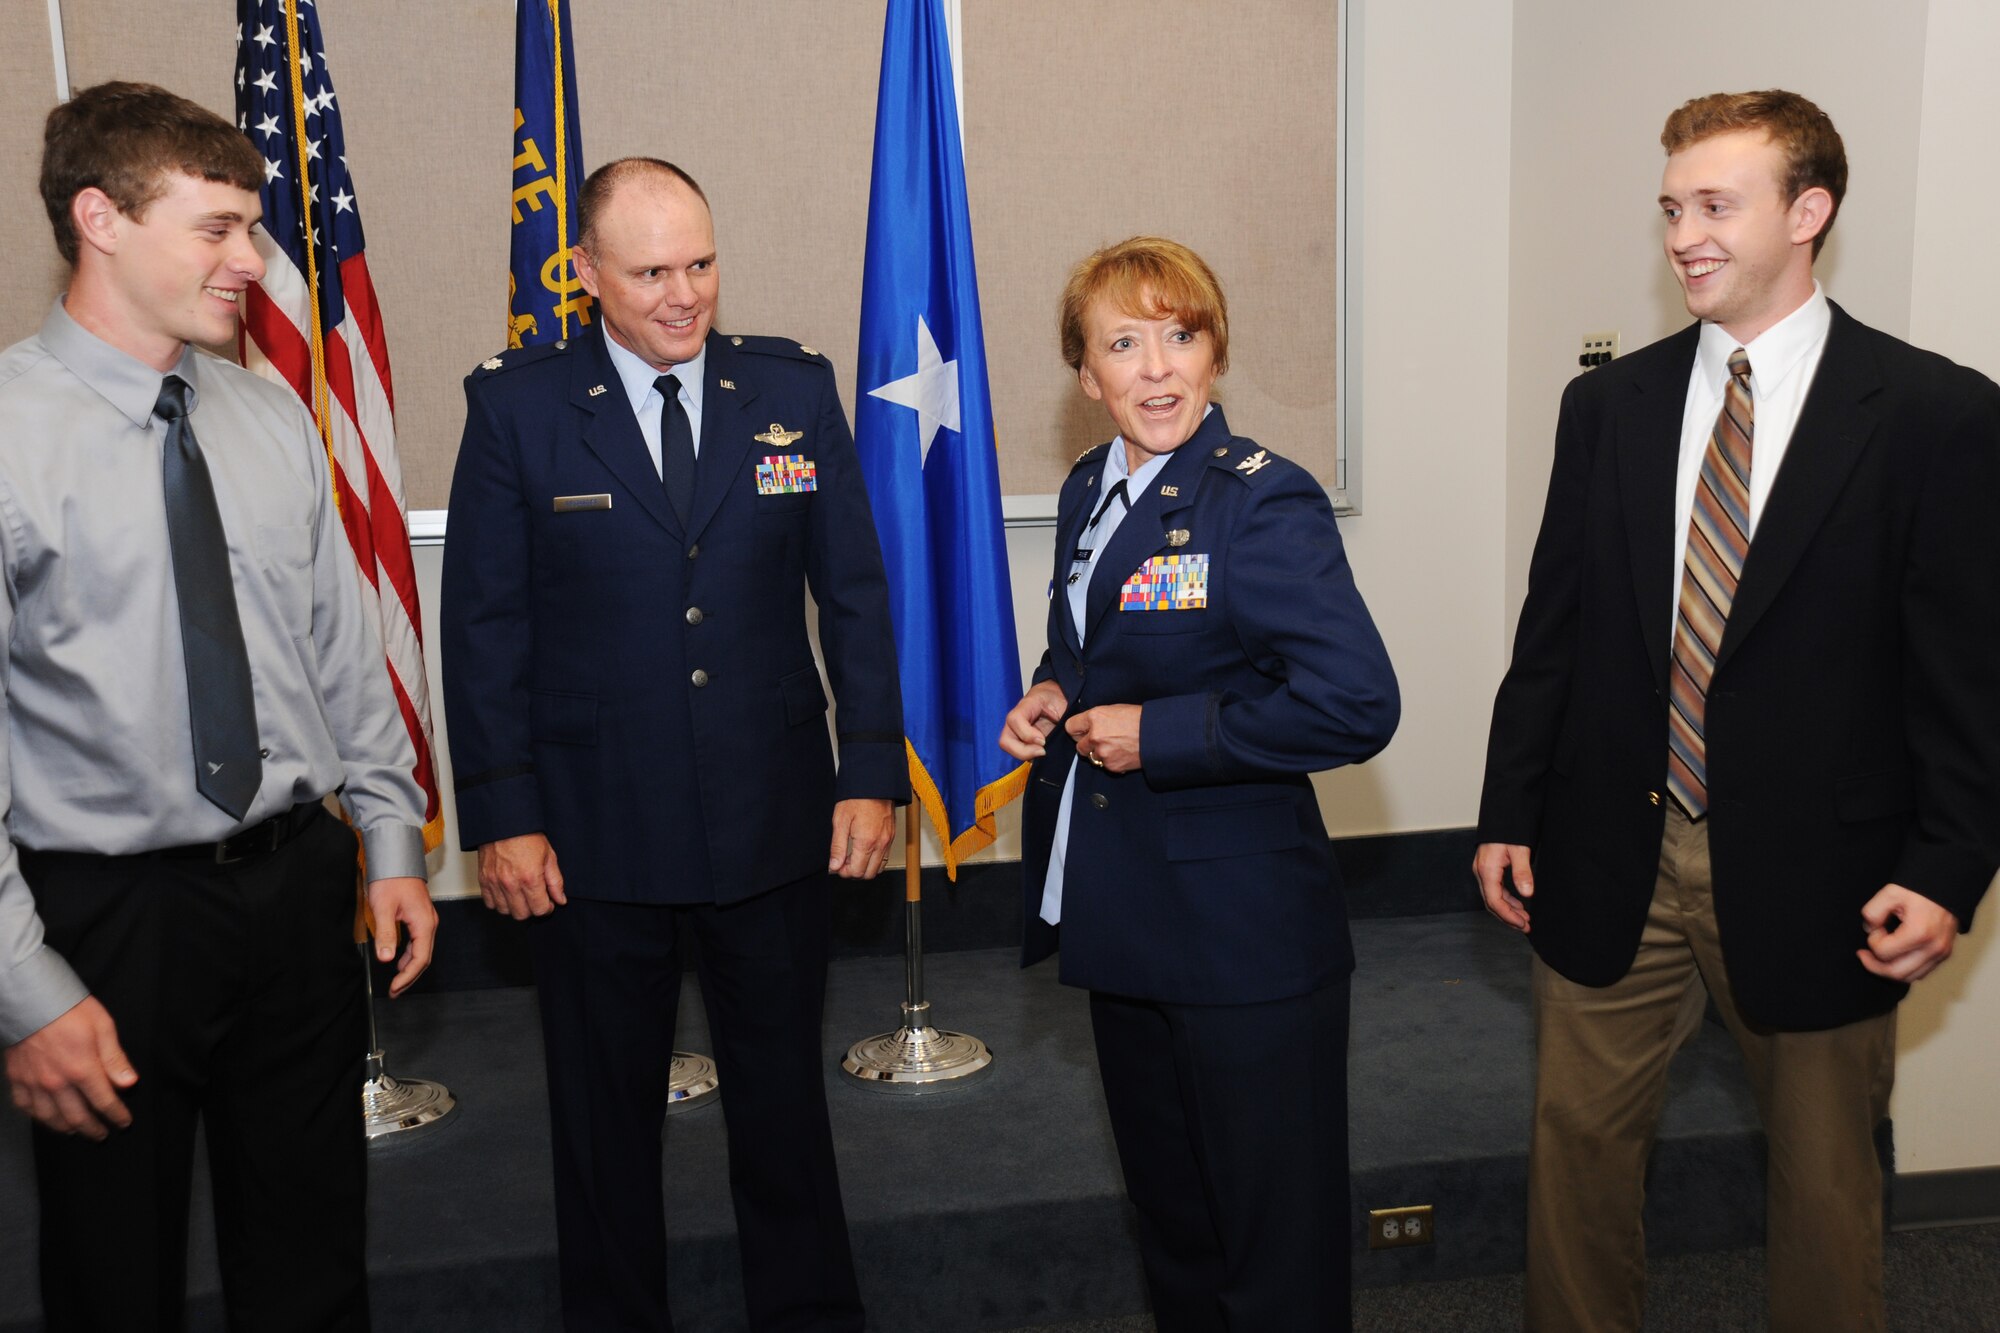 Newly promoted Colonel Donna Prigmore don a jacket bearing the colonel insignia with the assistance of her husband Lt. Col. John Prigmore, during her promotion ceremony held at the Portland Air National Guard Base, Ore., Aug. 3, 2014. (U.S. Air National Guard photo by Tech. Sgt. John Hughel, 142nd Fighter Wing Public Affairs/Released)